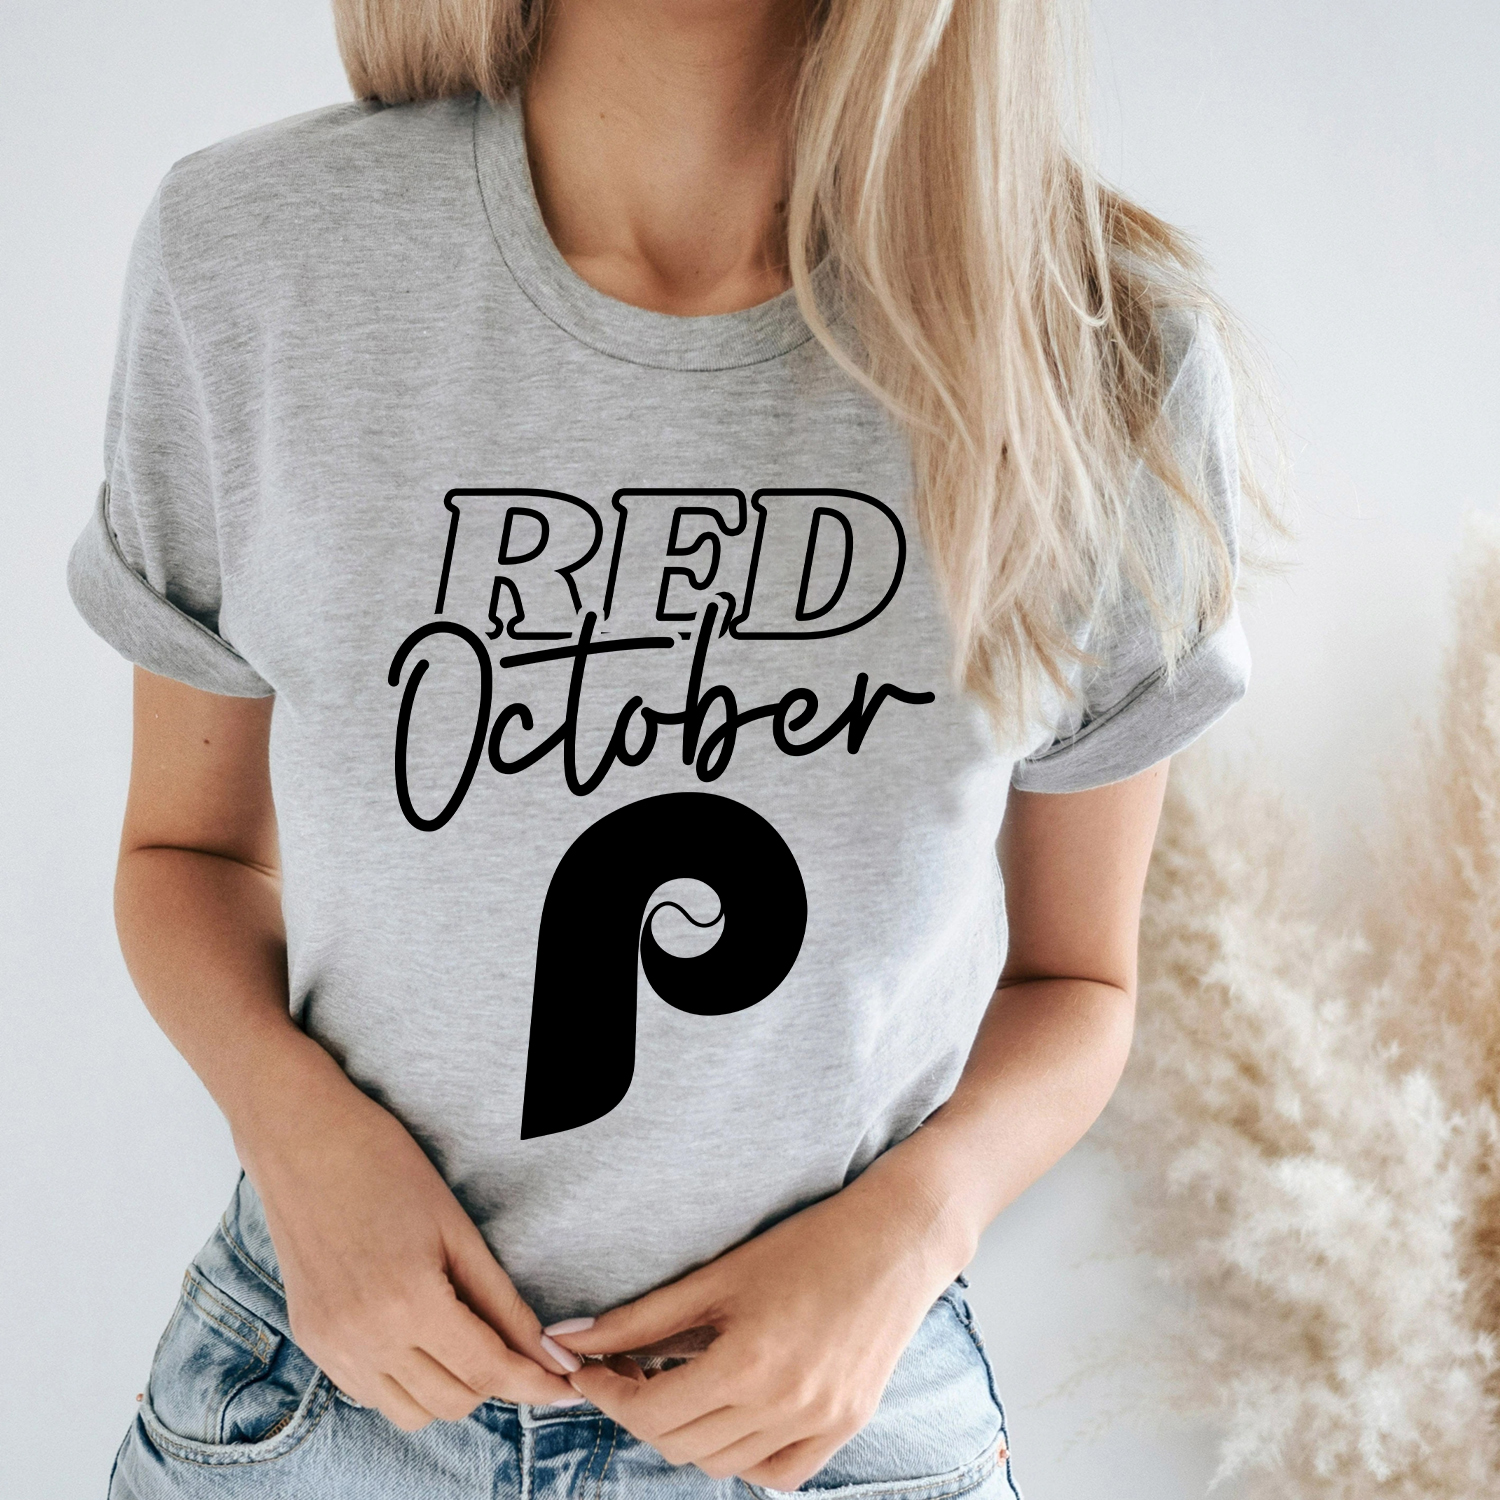 Philadelphia Phillies T Shirts Red October Sweatshirt, Phillies Fans Gifts  - Happy Place for Music Lovers